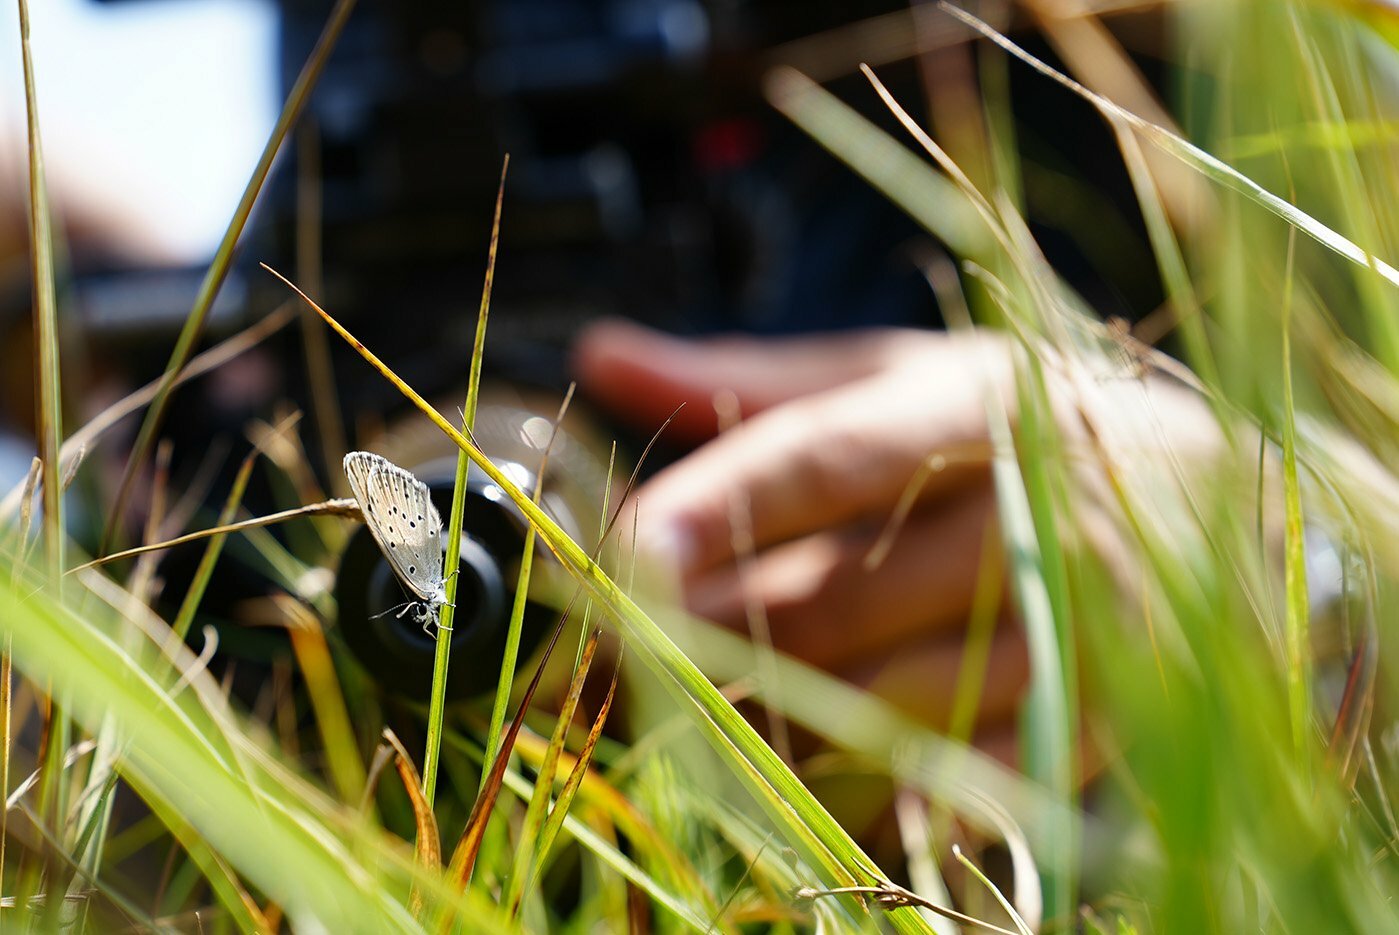 Cameraman filming an alcon blue butterfly on a blade of grass.